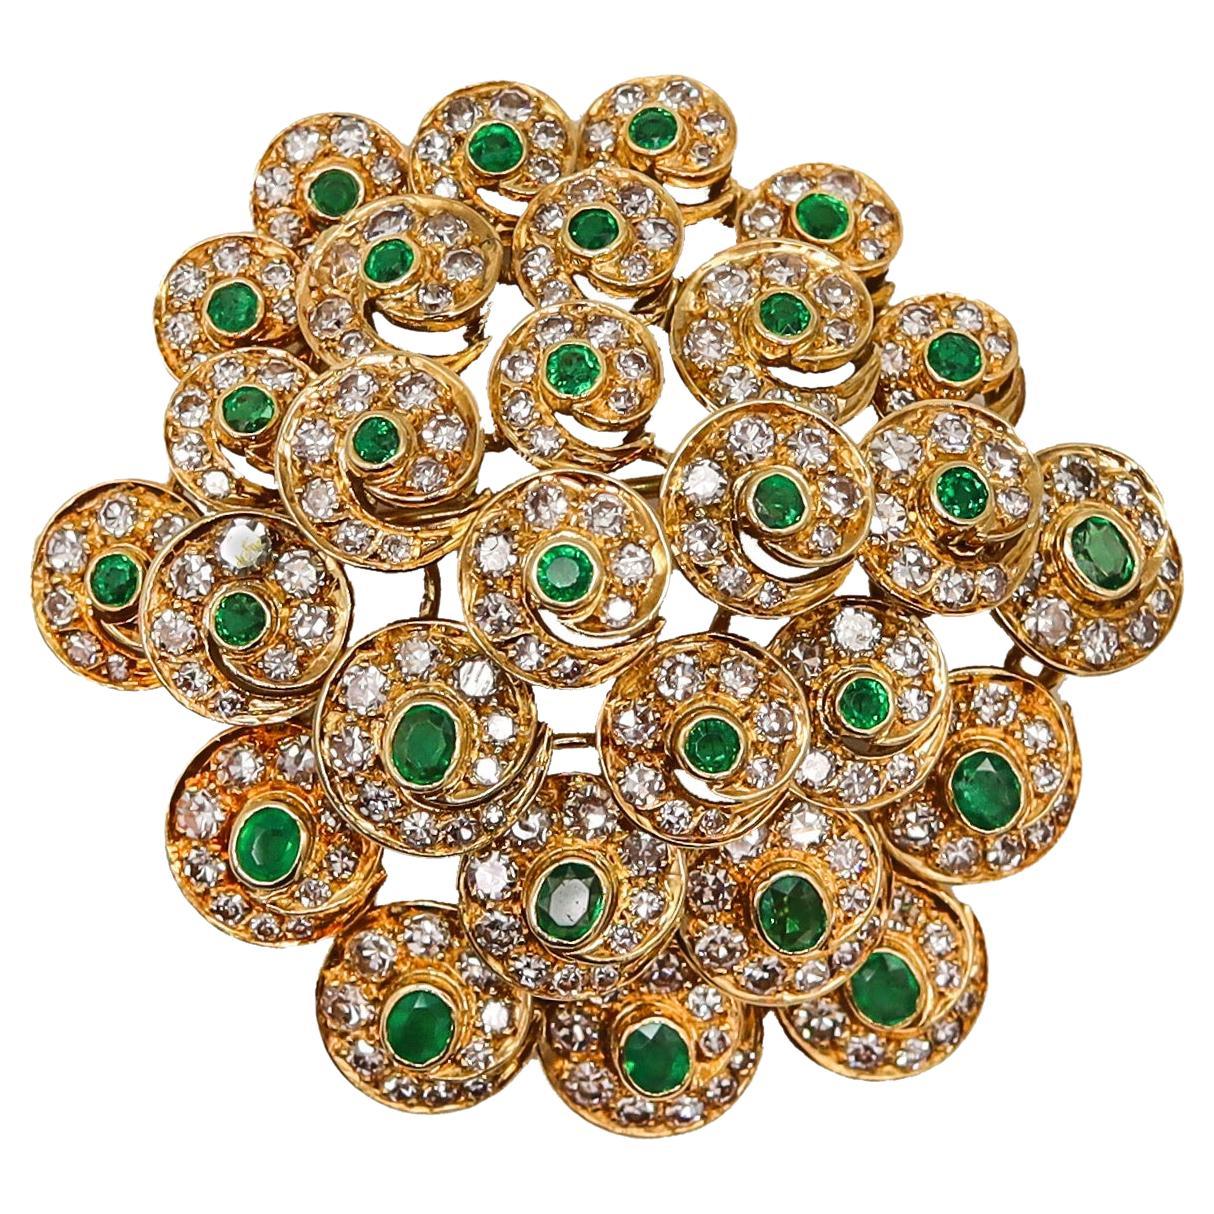 Convertible Pendant Brooch in 18Kt Gold with 10.48 Cts in Diamonds and Emeralds